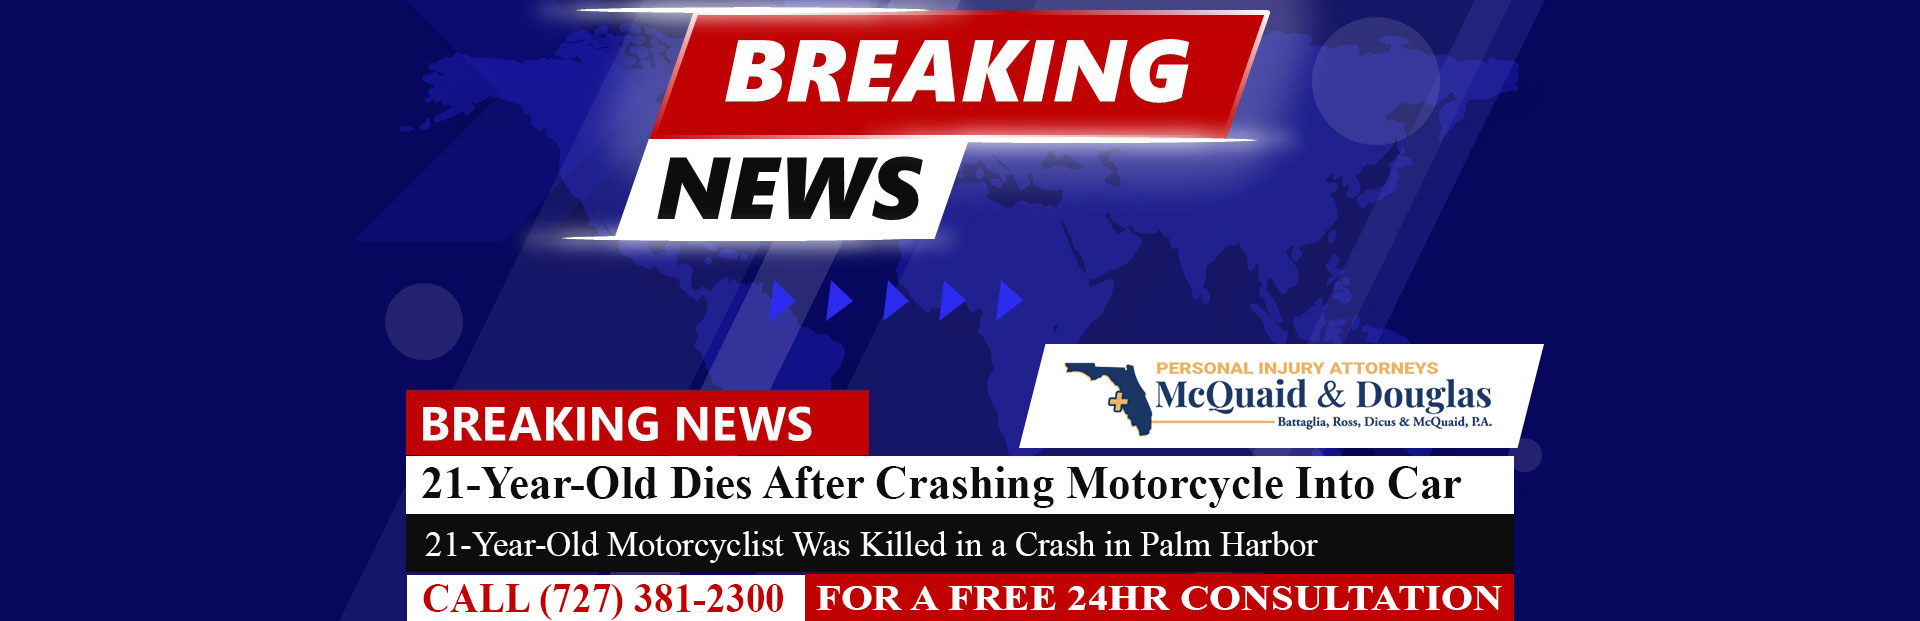 [8-4-22] FHP: 21-Year-Old Dies After Crashing Motorcycle Into Car